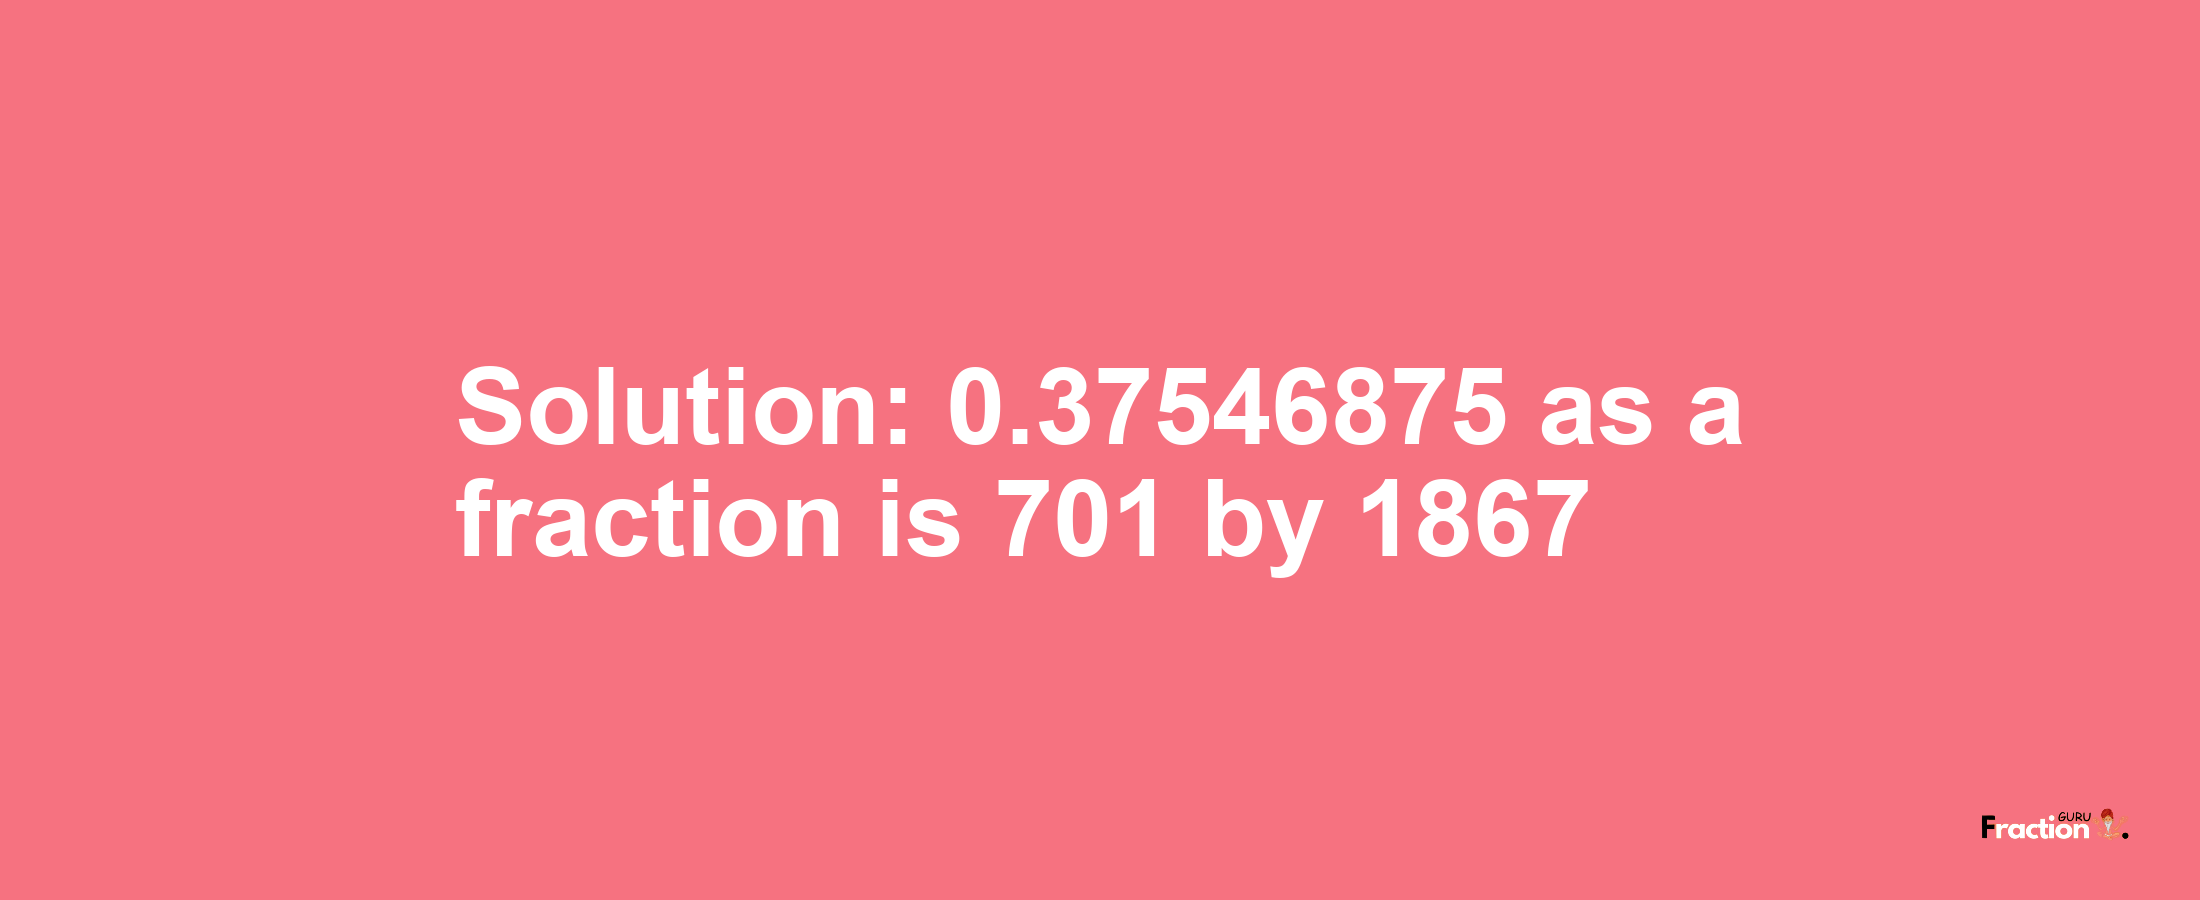 Solution:0.37546875 as a fraction is 701/1867